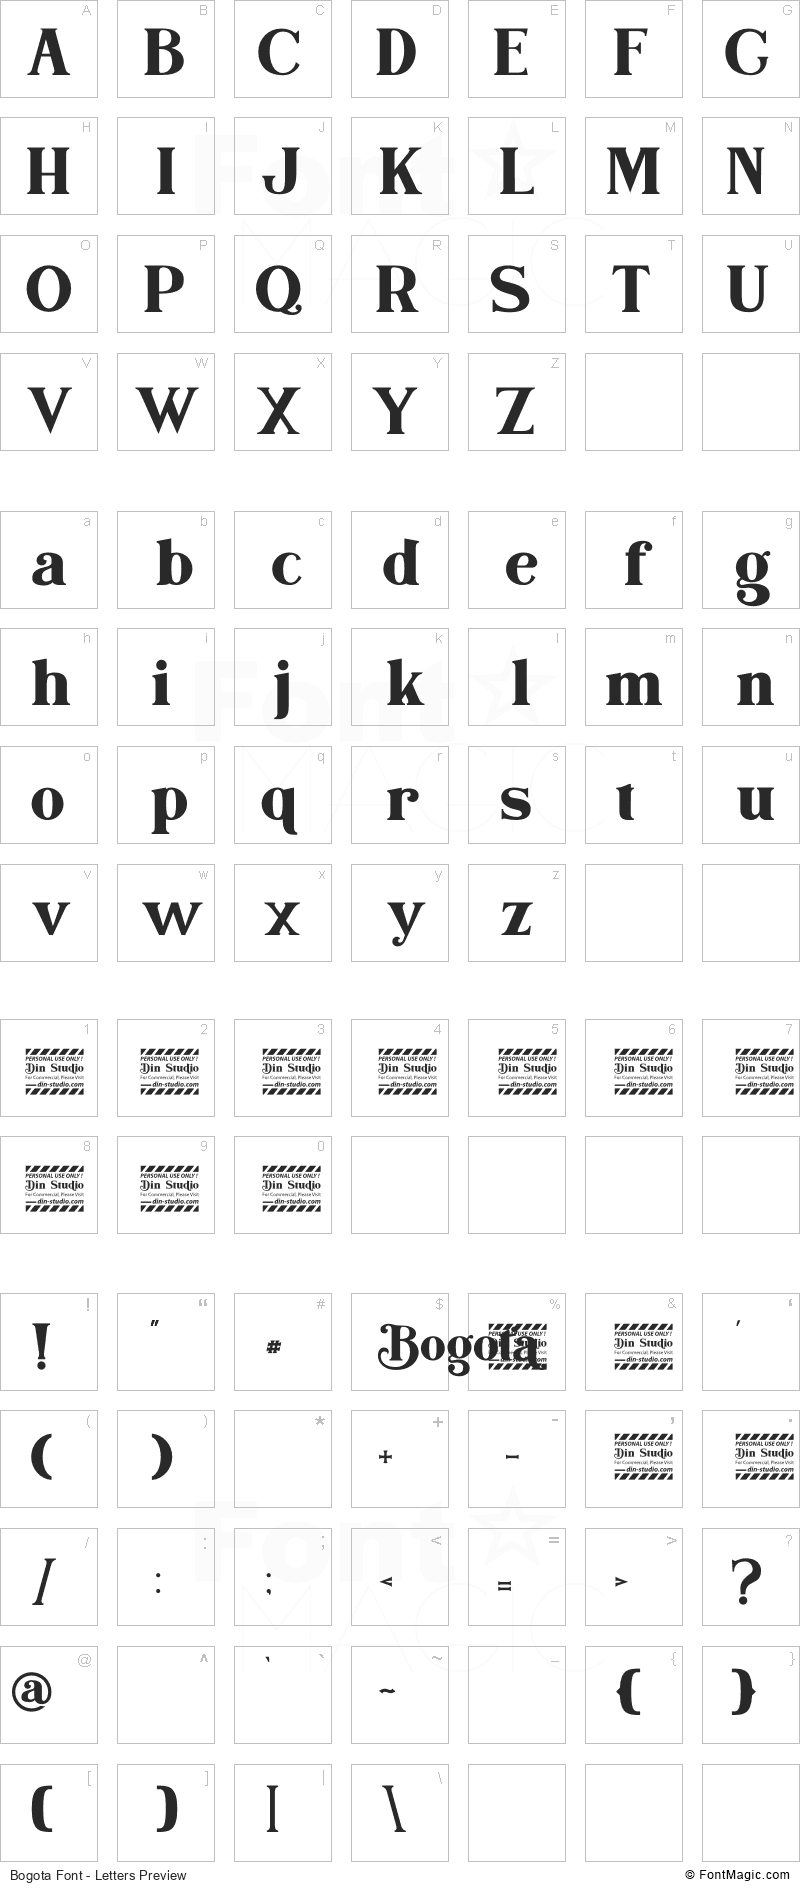 Bogota Font - All Latters Preview Chart